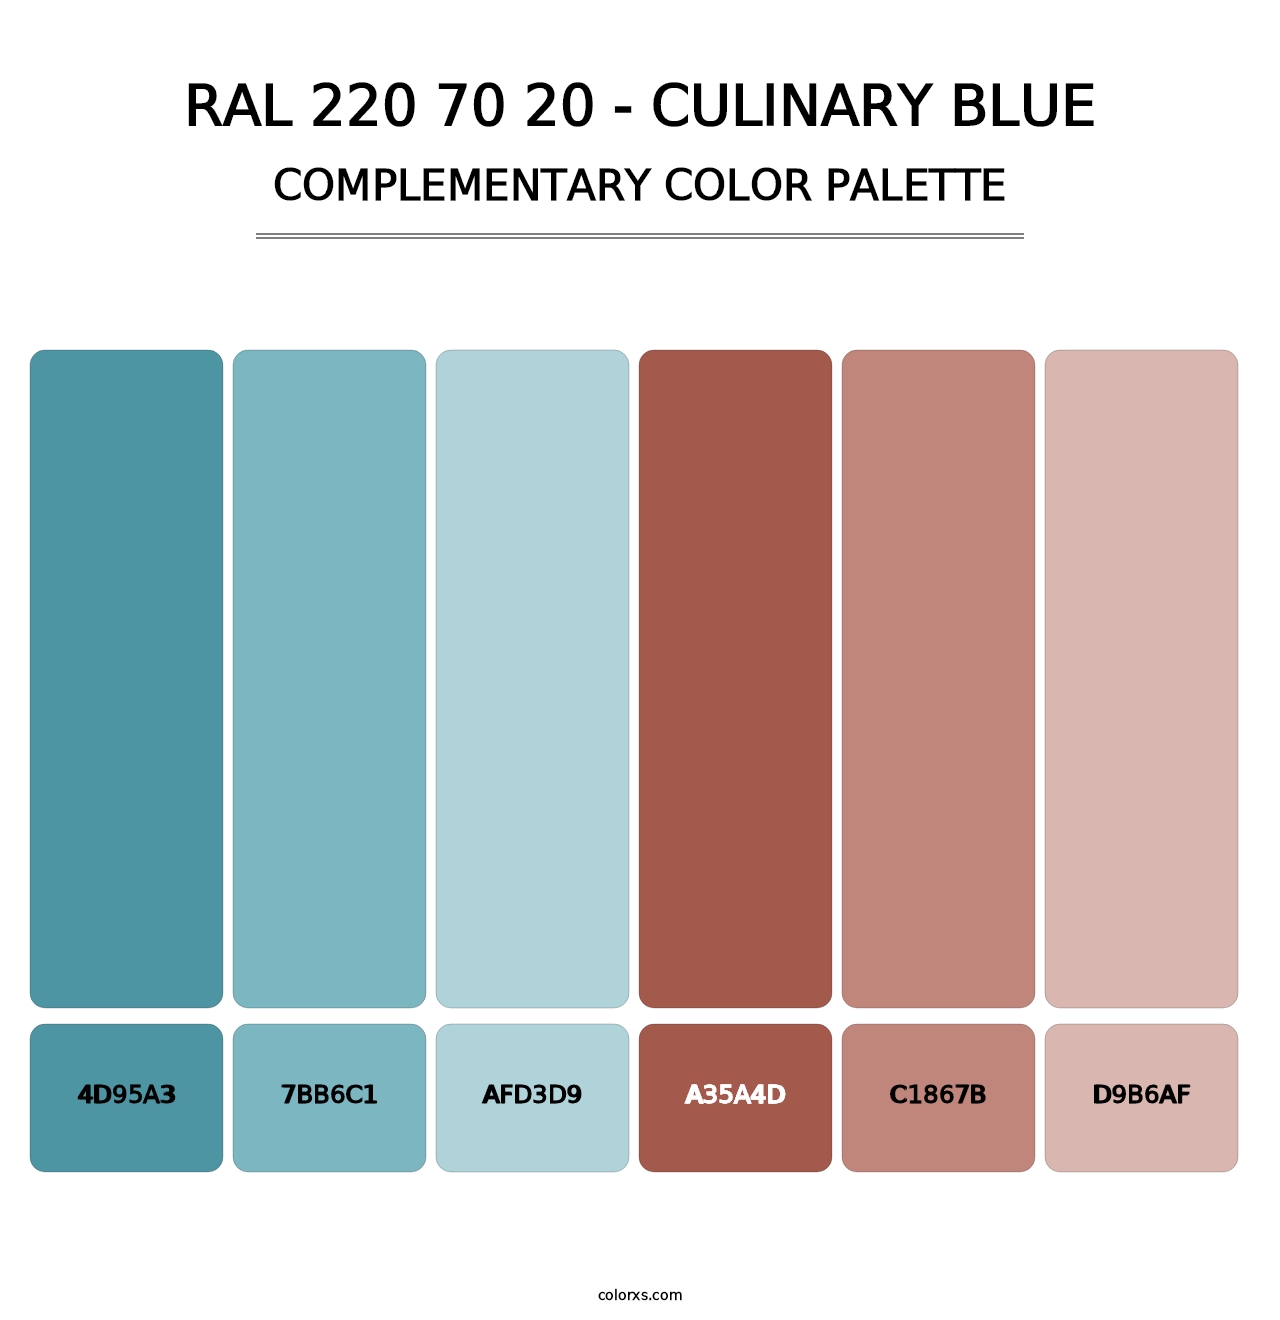 RAL 220 70 20 - Culinary Blue - Complementary Color Palette